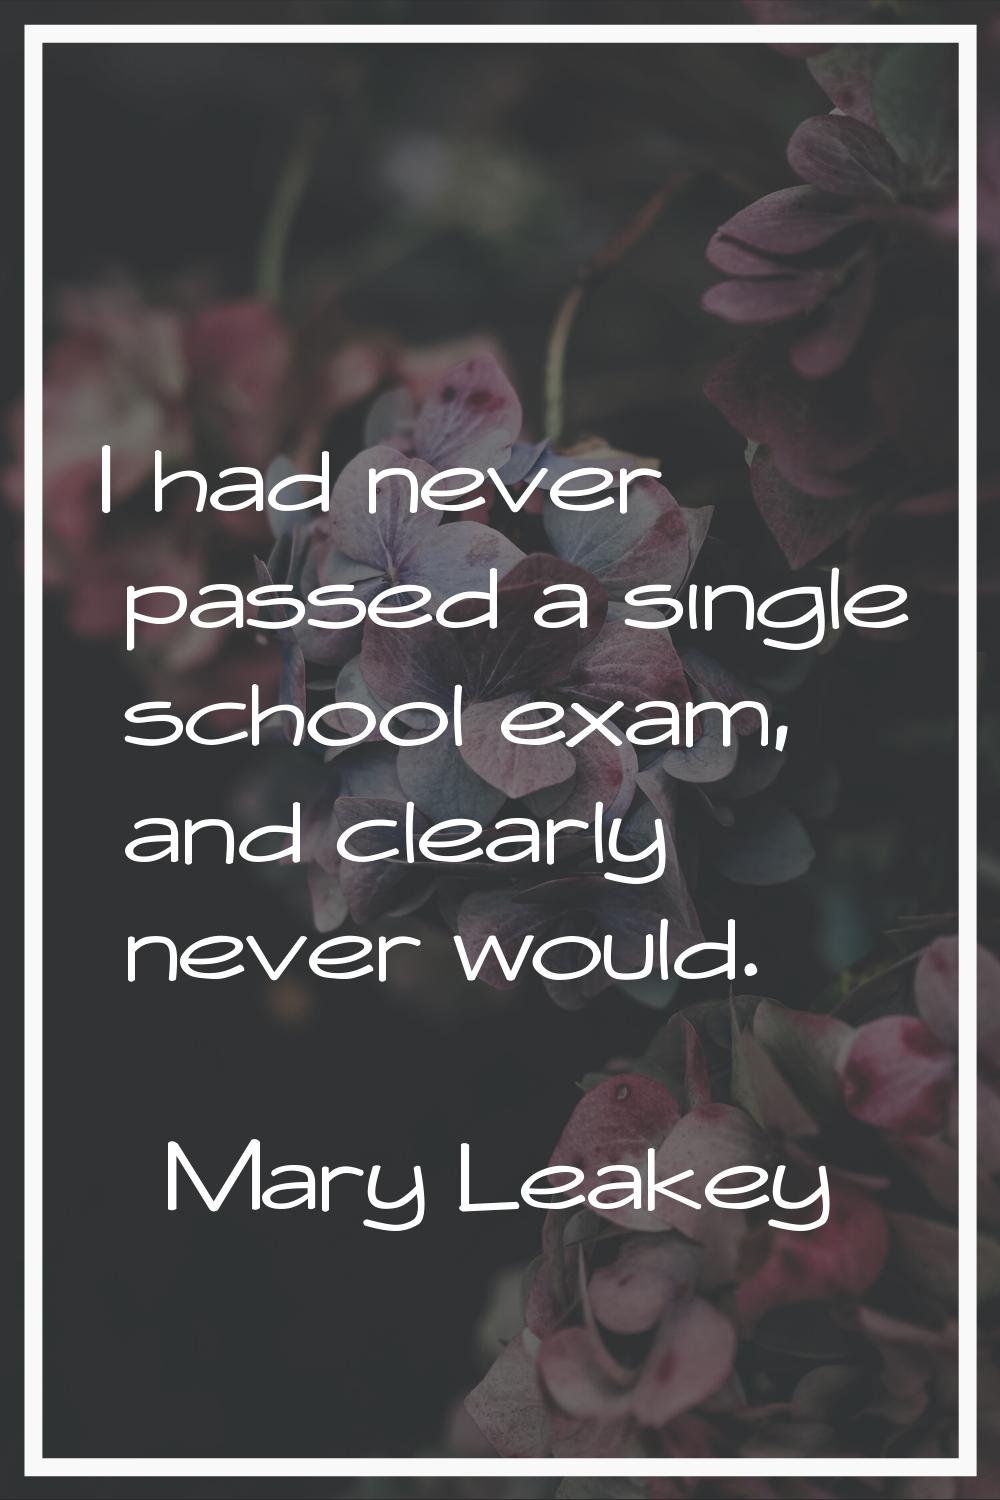 I had never passed a single school exam, and clearly never would.